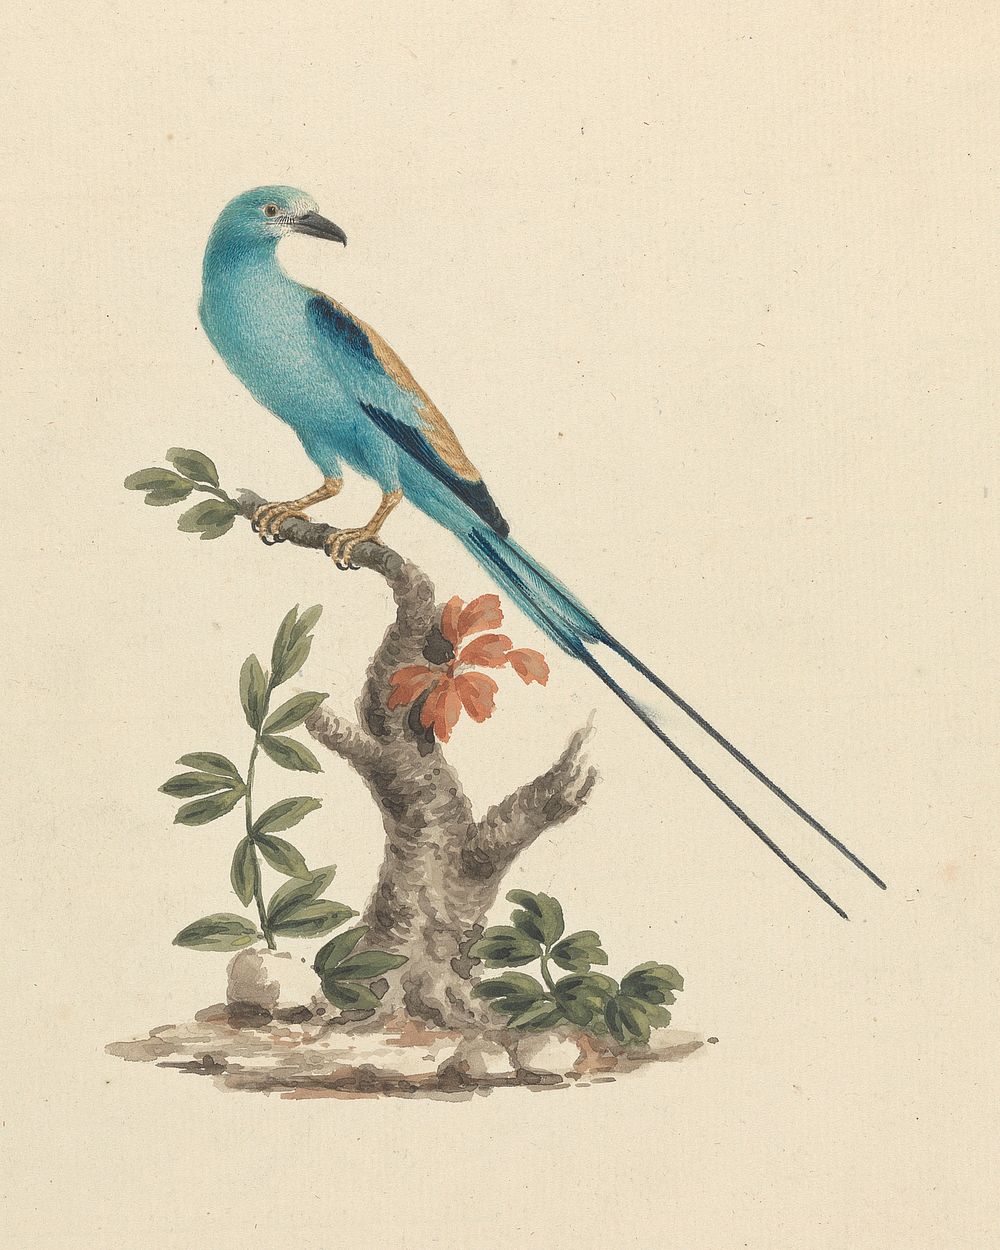 Coracias abyssinicus (Abyssinian Roller)